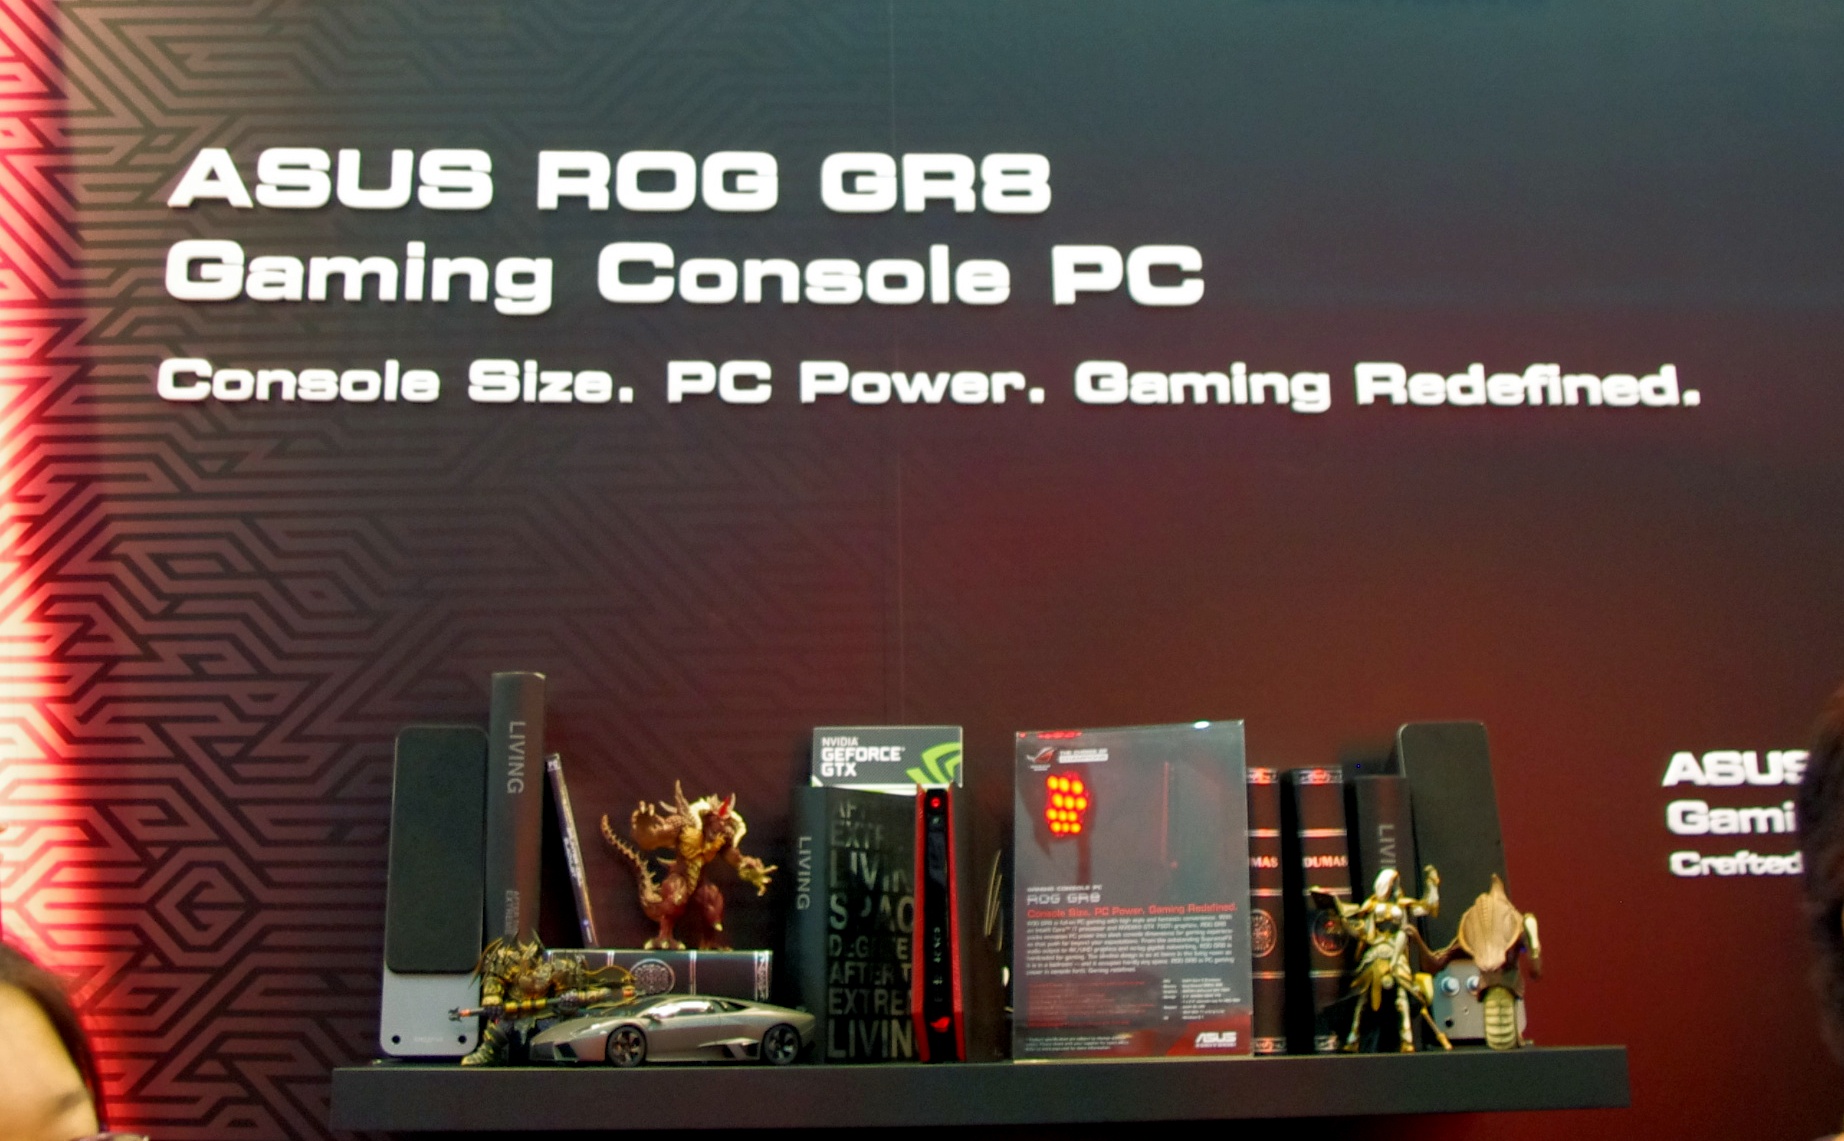 ROG GR8 and ROG G20 - 2014: The ASUS Booth